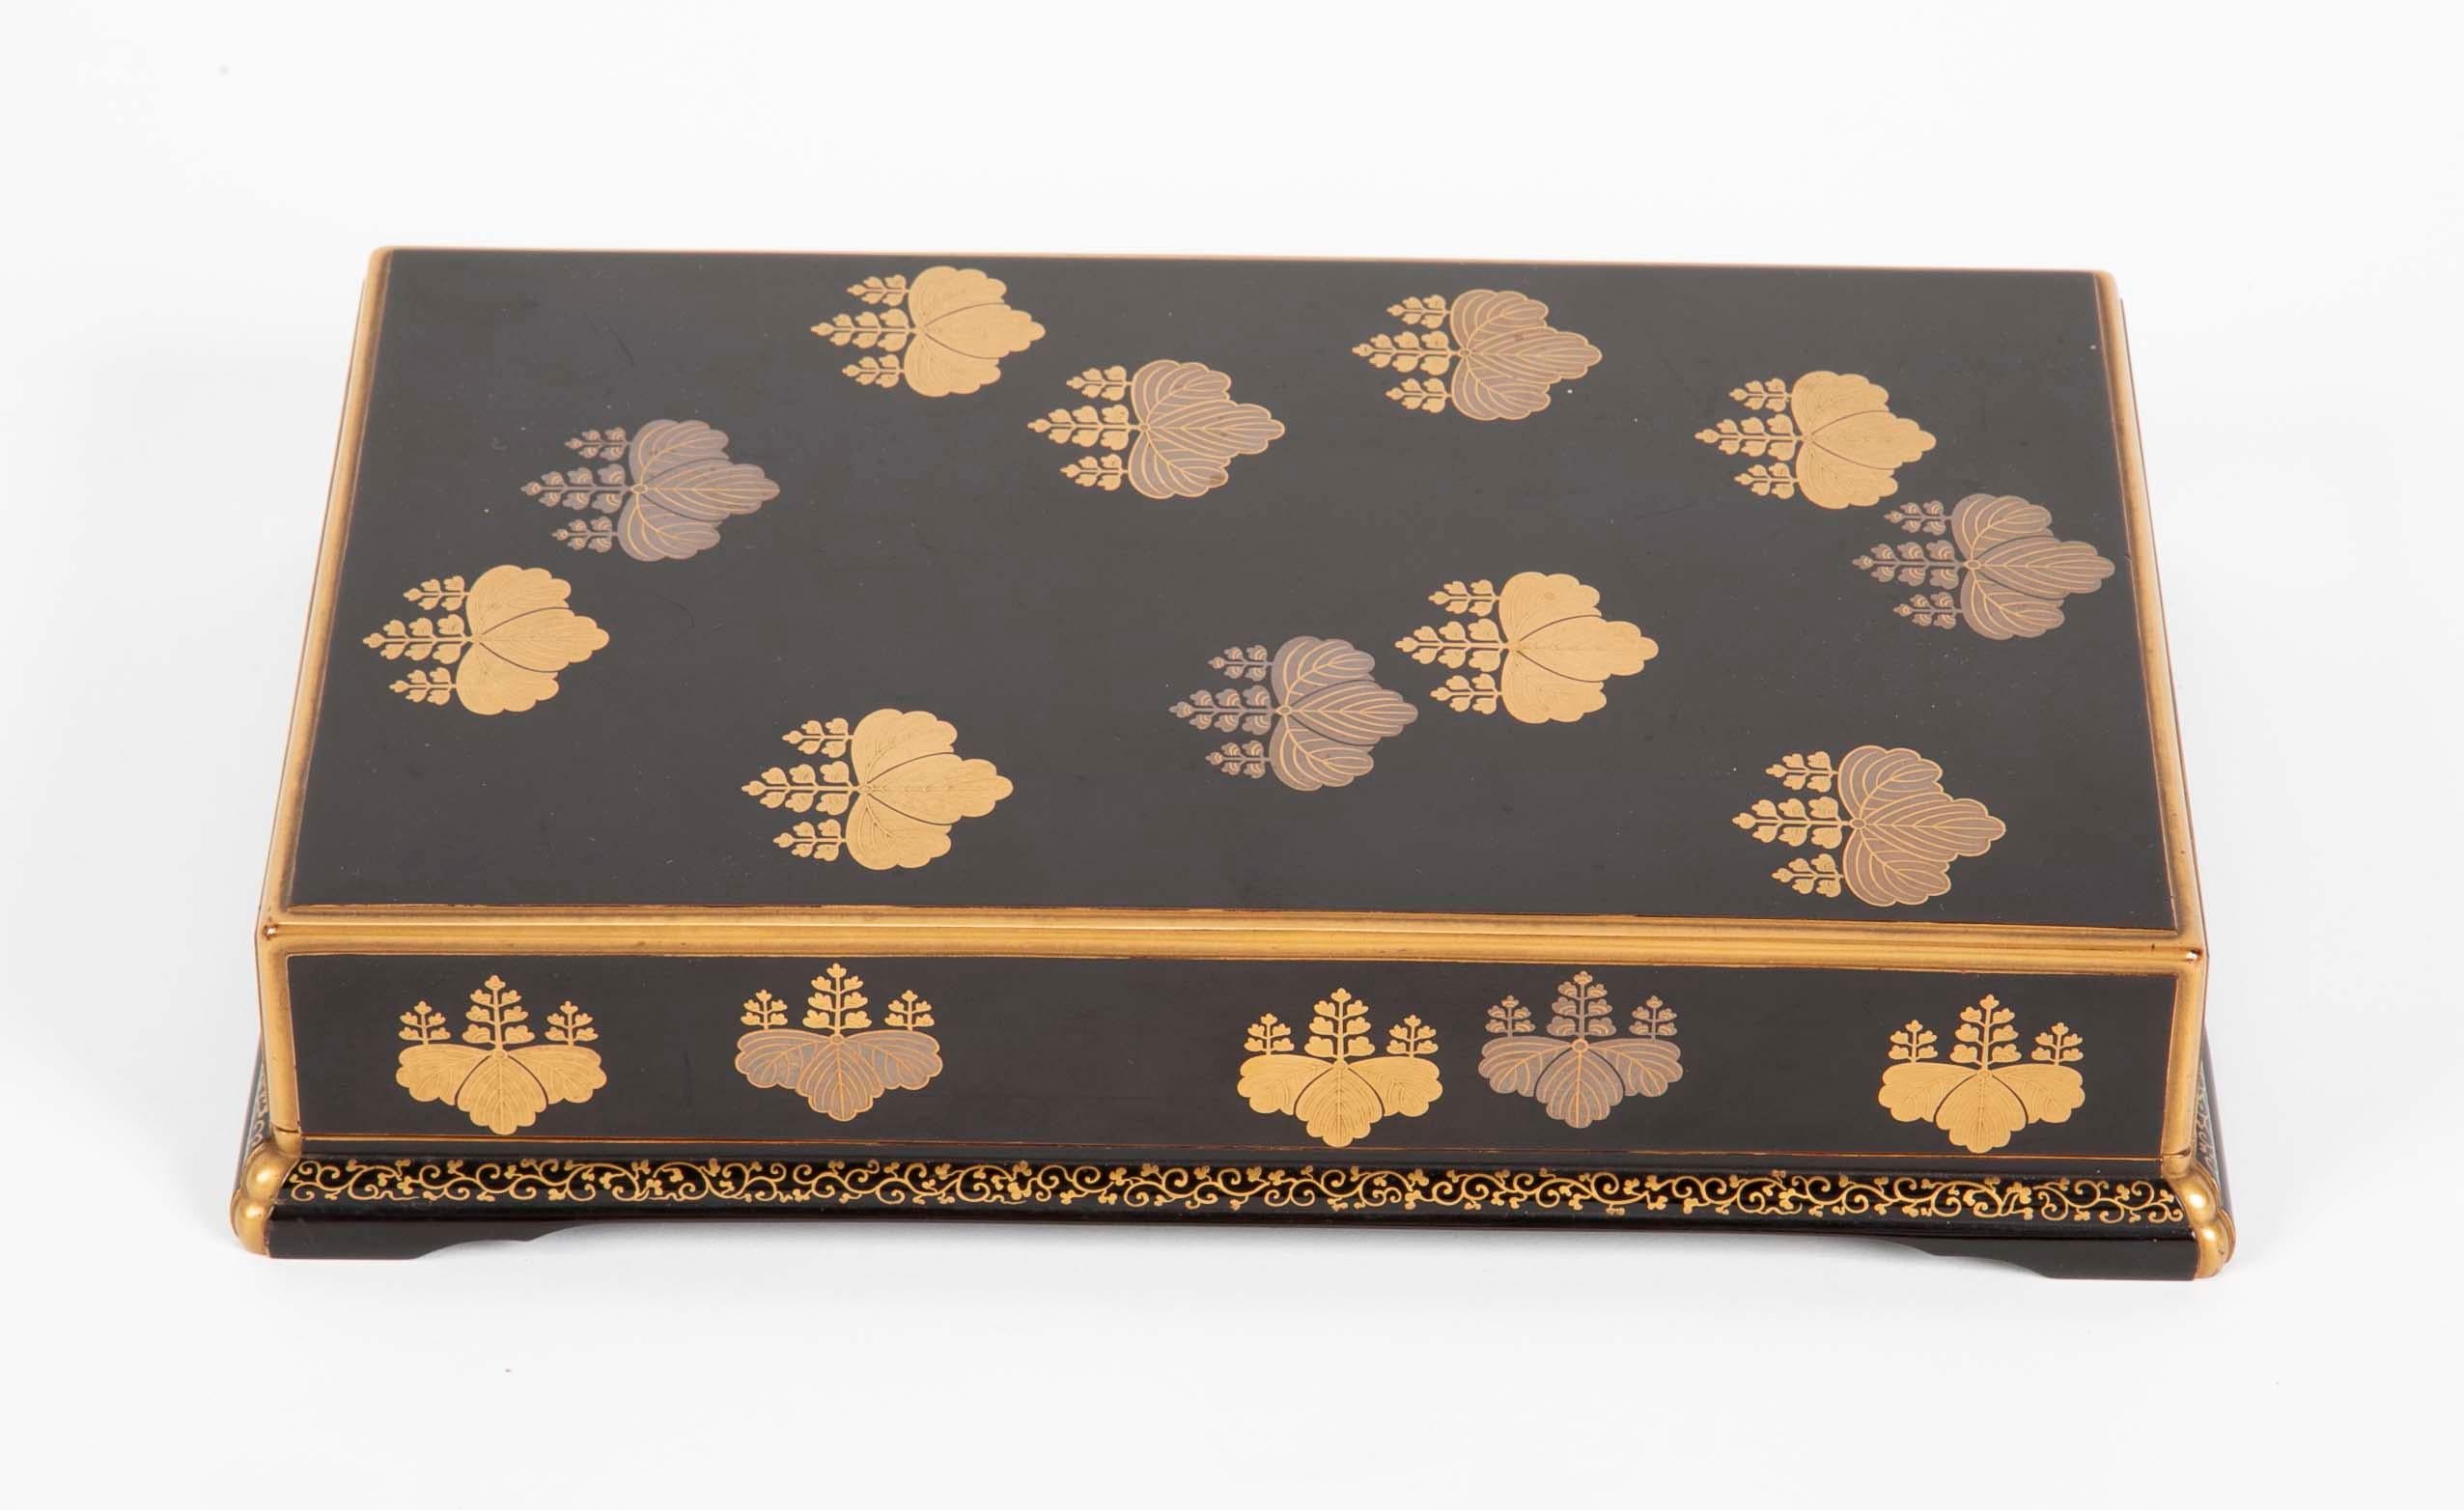 Black lacquer Japanese ink stone box in presentation case decorated with gold mons, late 18th-early 19th century Edo period.